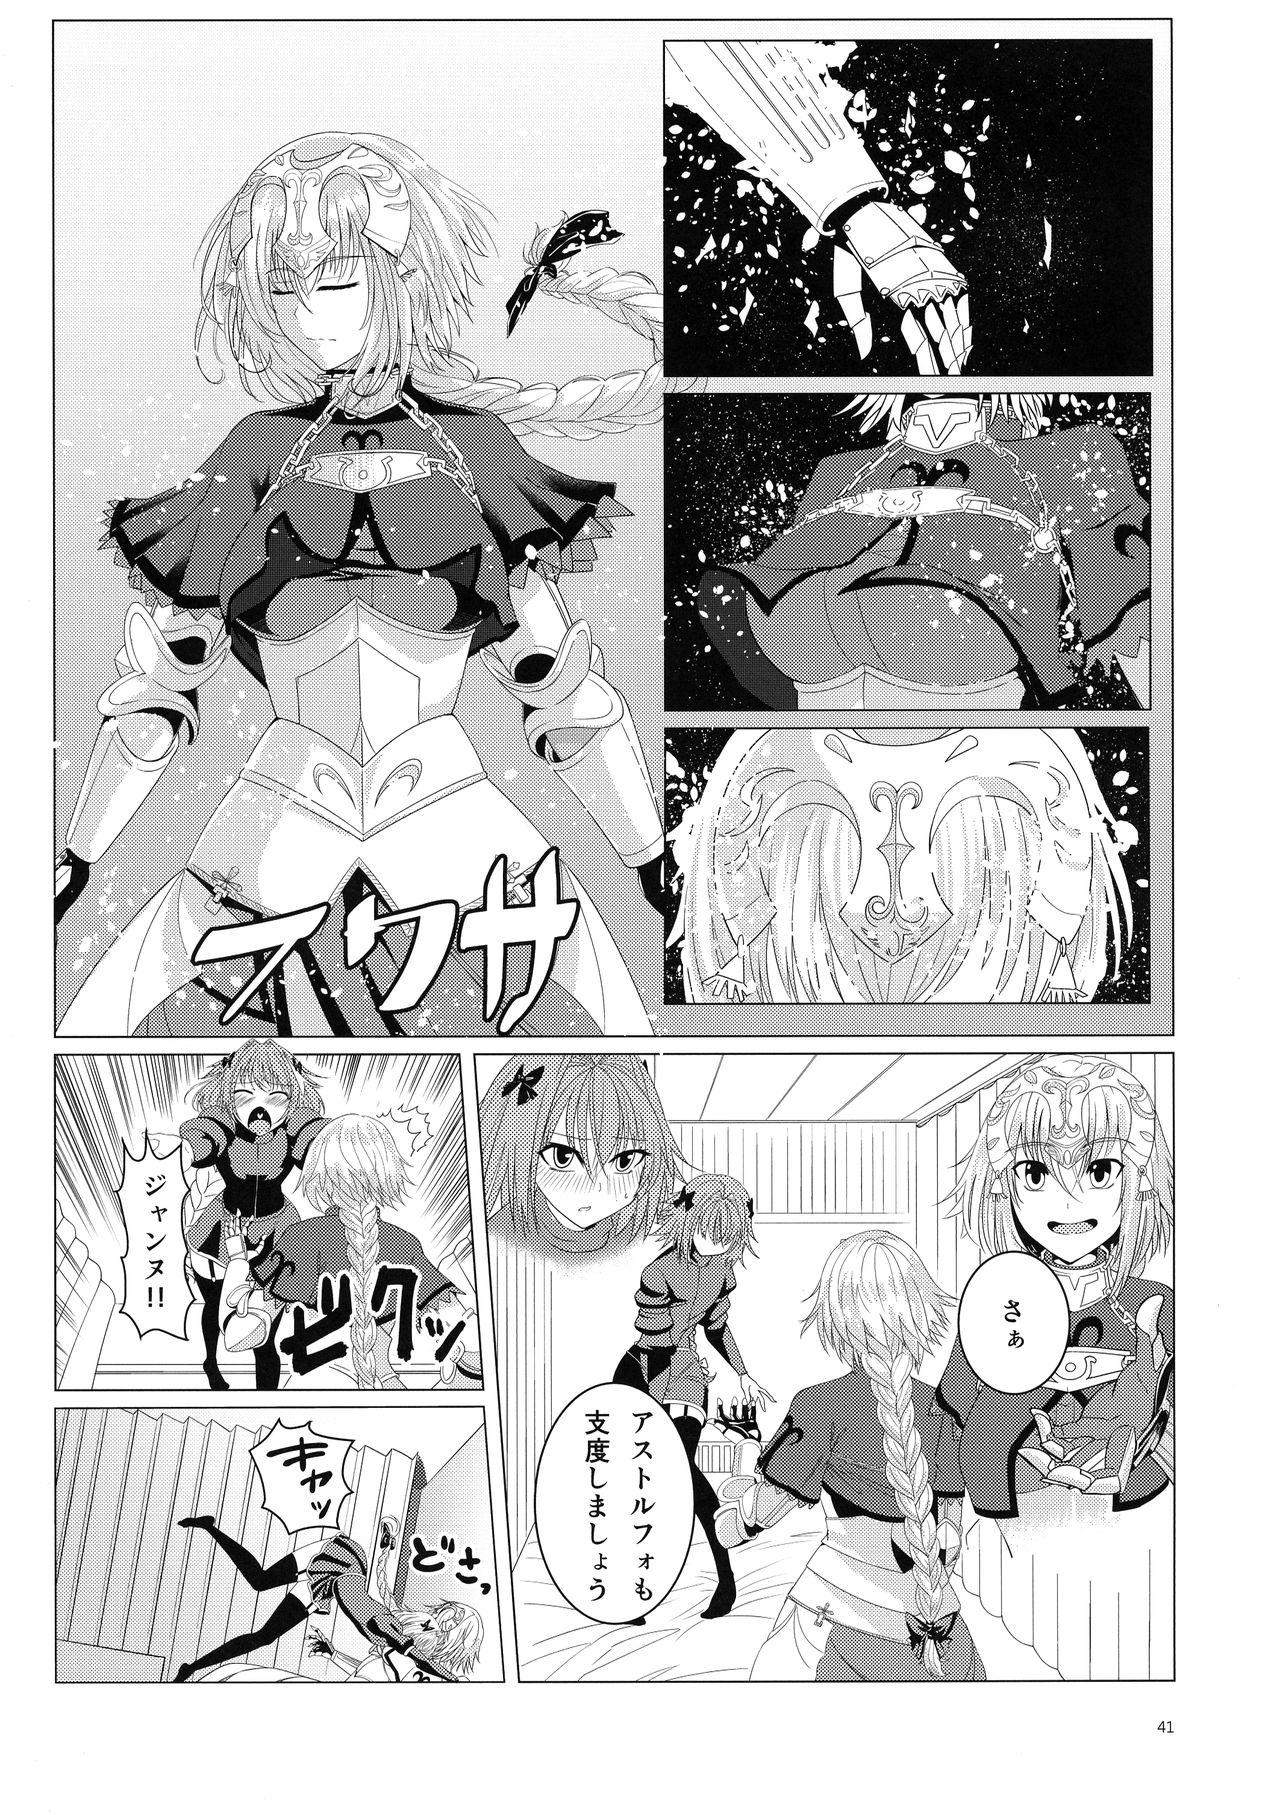 Matching Spirits - Jeanne and Astolfo have sex 37